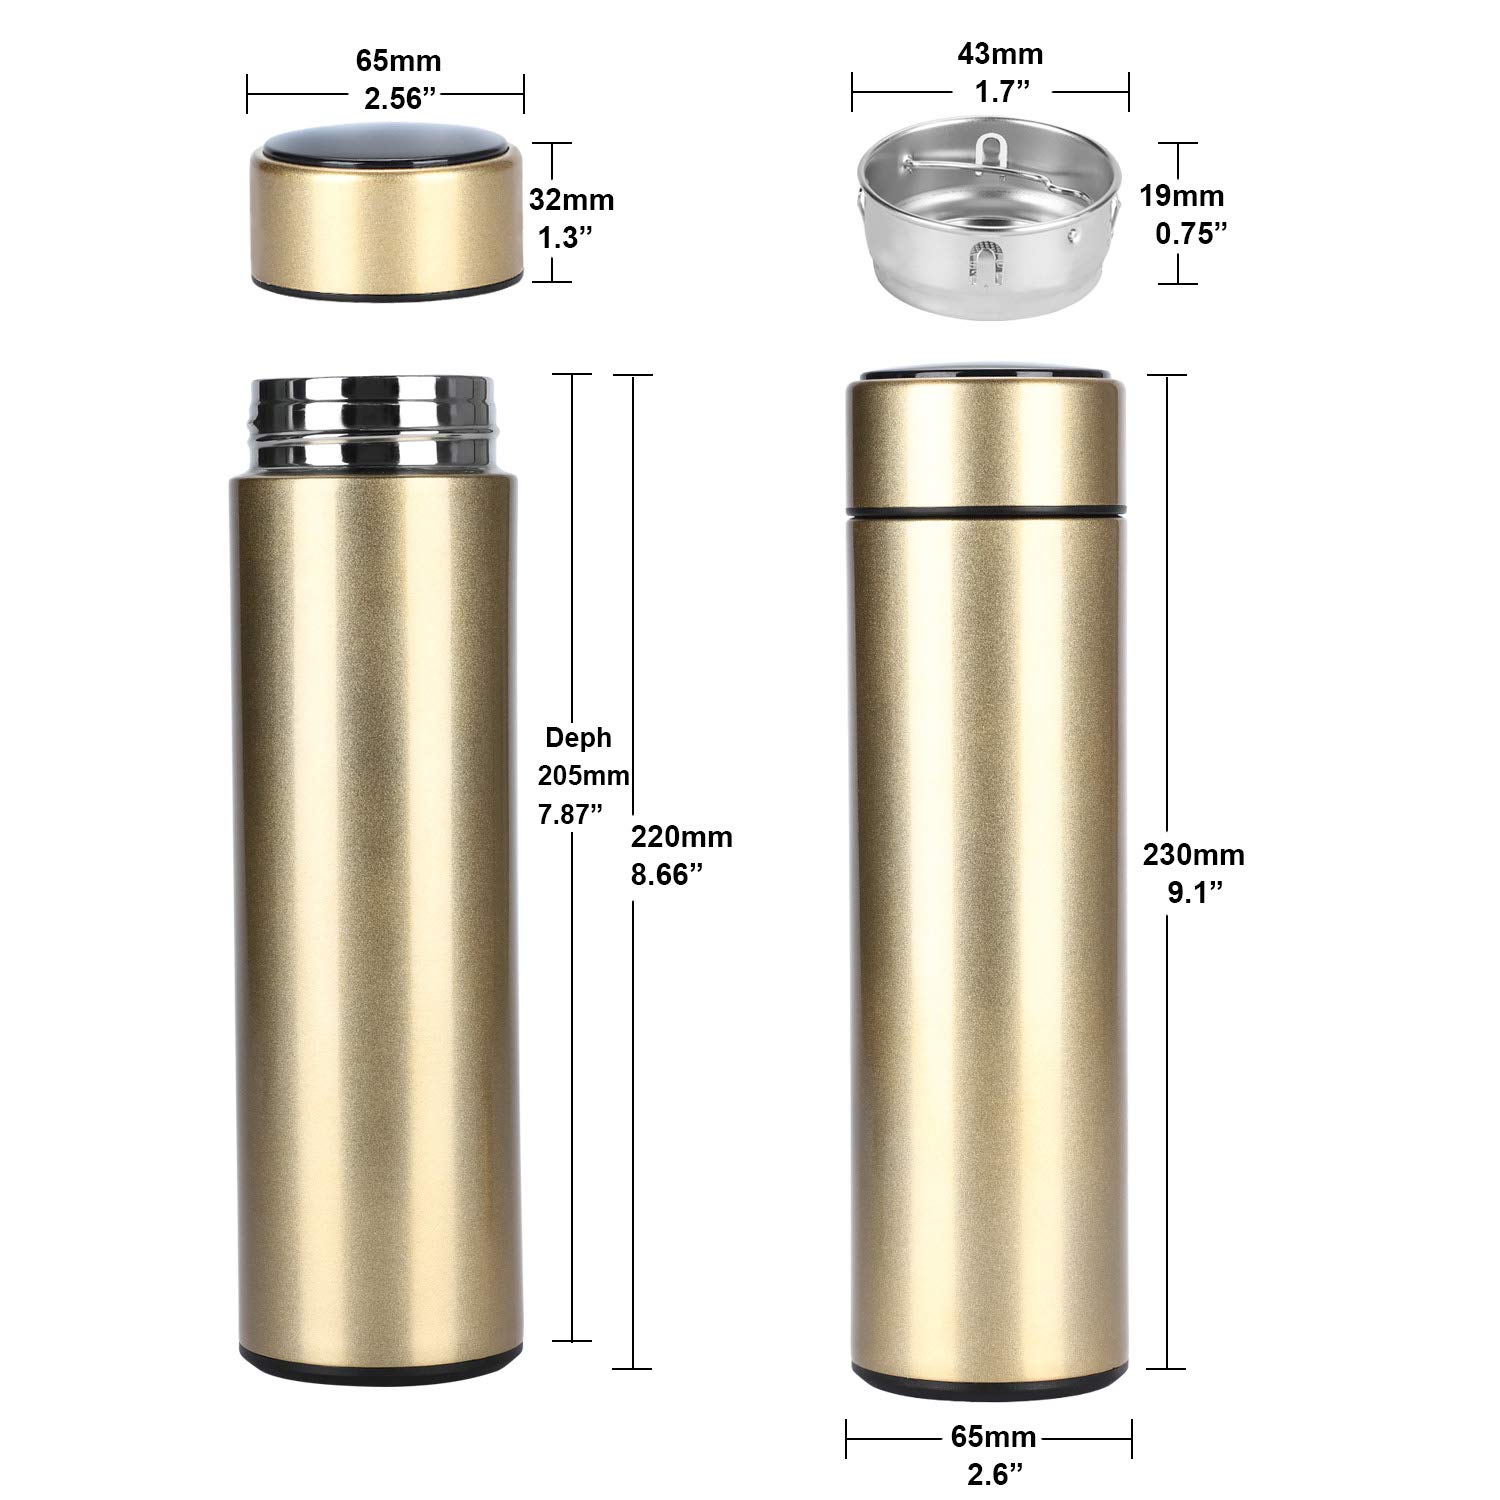 Temperature Display Vacuum Insulated Water Bottle 17oz,Thermo Flask Made of Premium Stainless Steel Coffee/ Water, Smart Cup, Novelty Gifts Mug, FDA Safety.